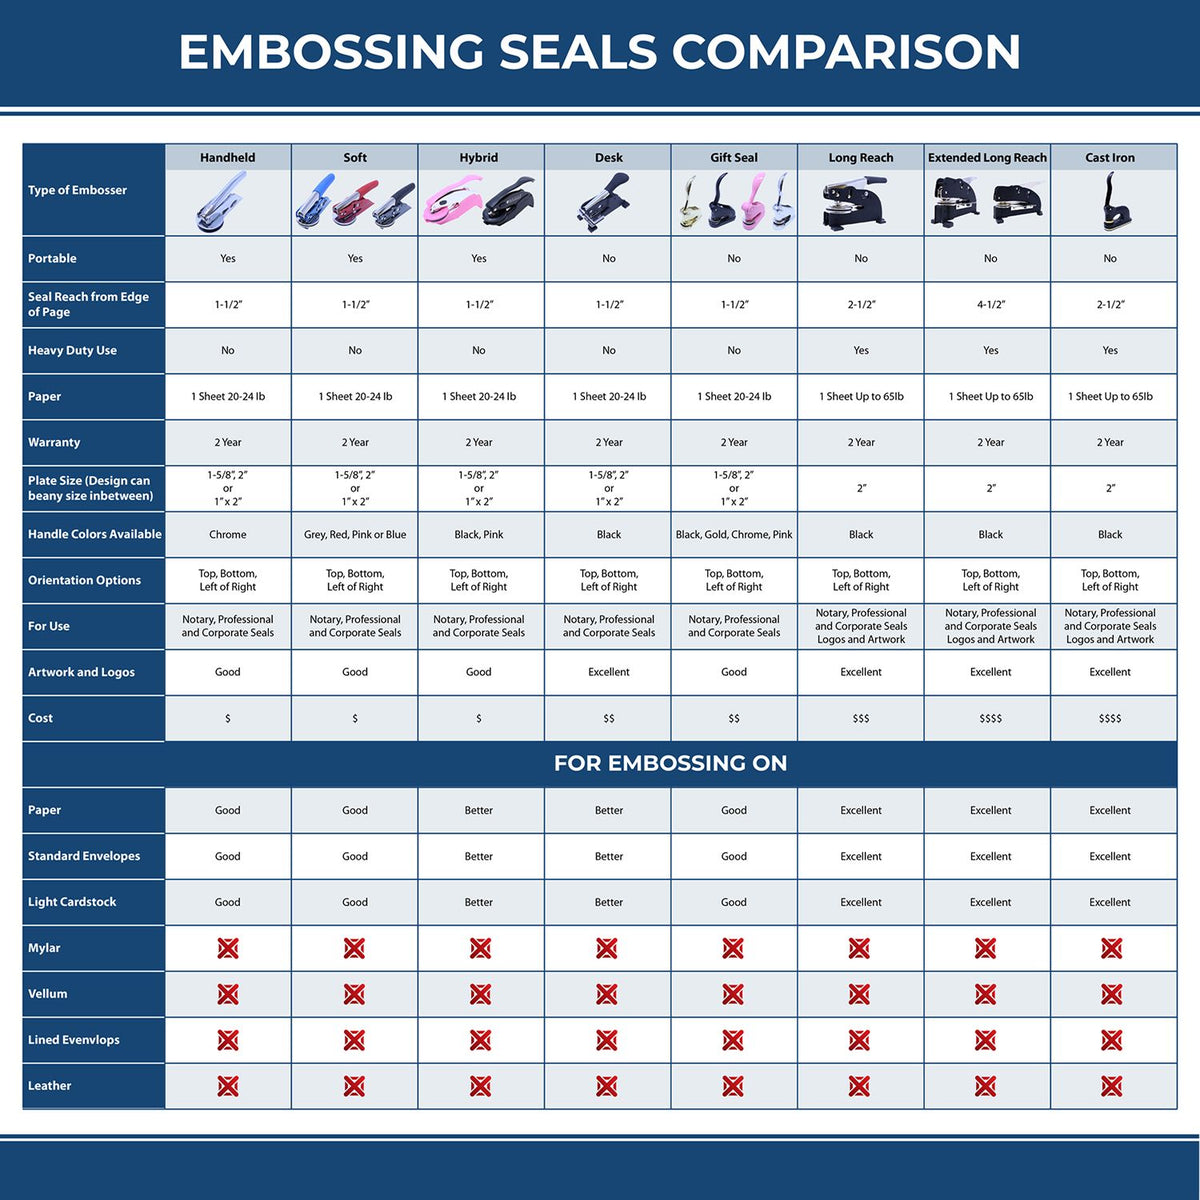 A comparison chart for the different types of mount models available for the Extended Long Reach Guam Architect Seal Embosser.